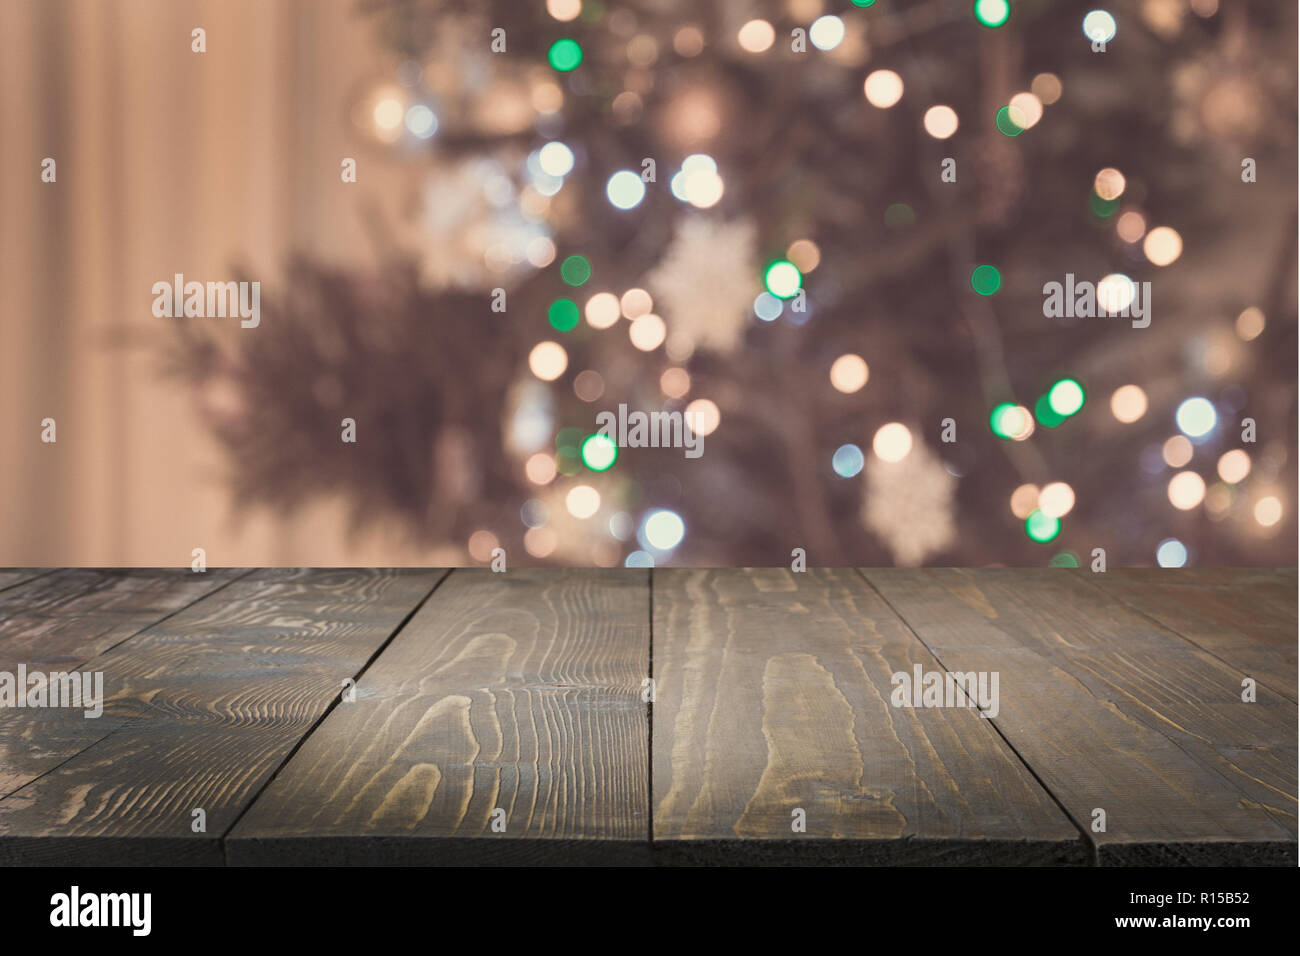 Wooden tabletop and blurred christmas tree in interior. Xmas background for display your products. Stock Photo